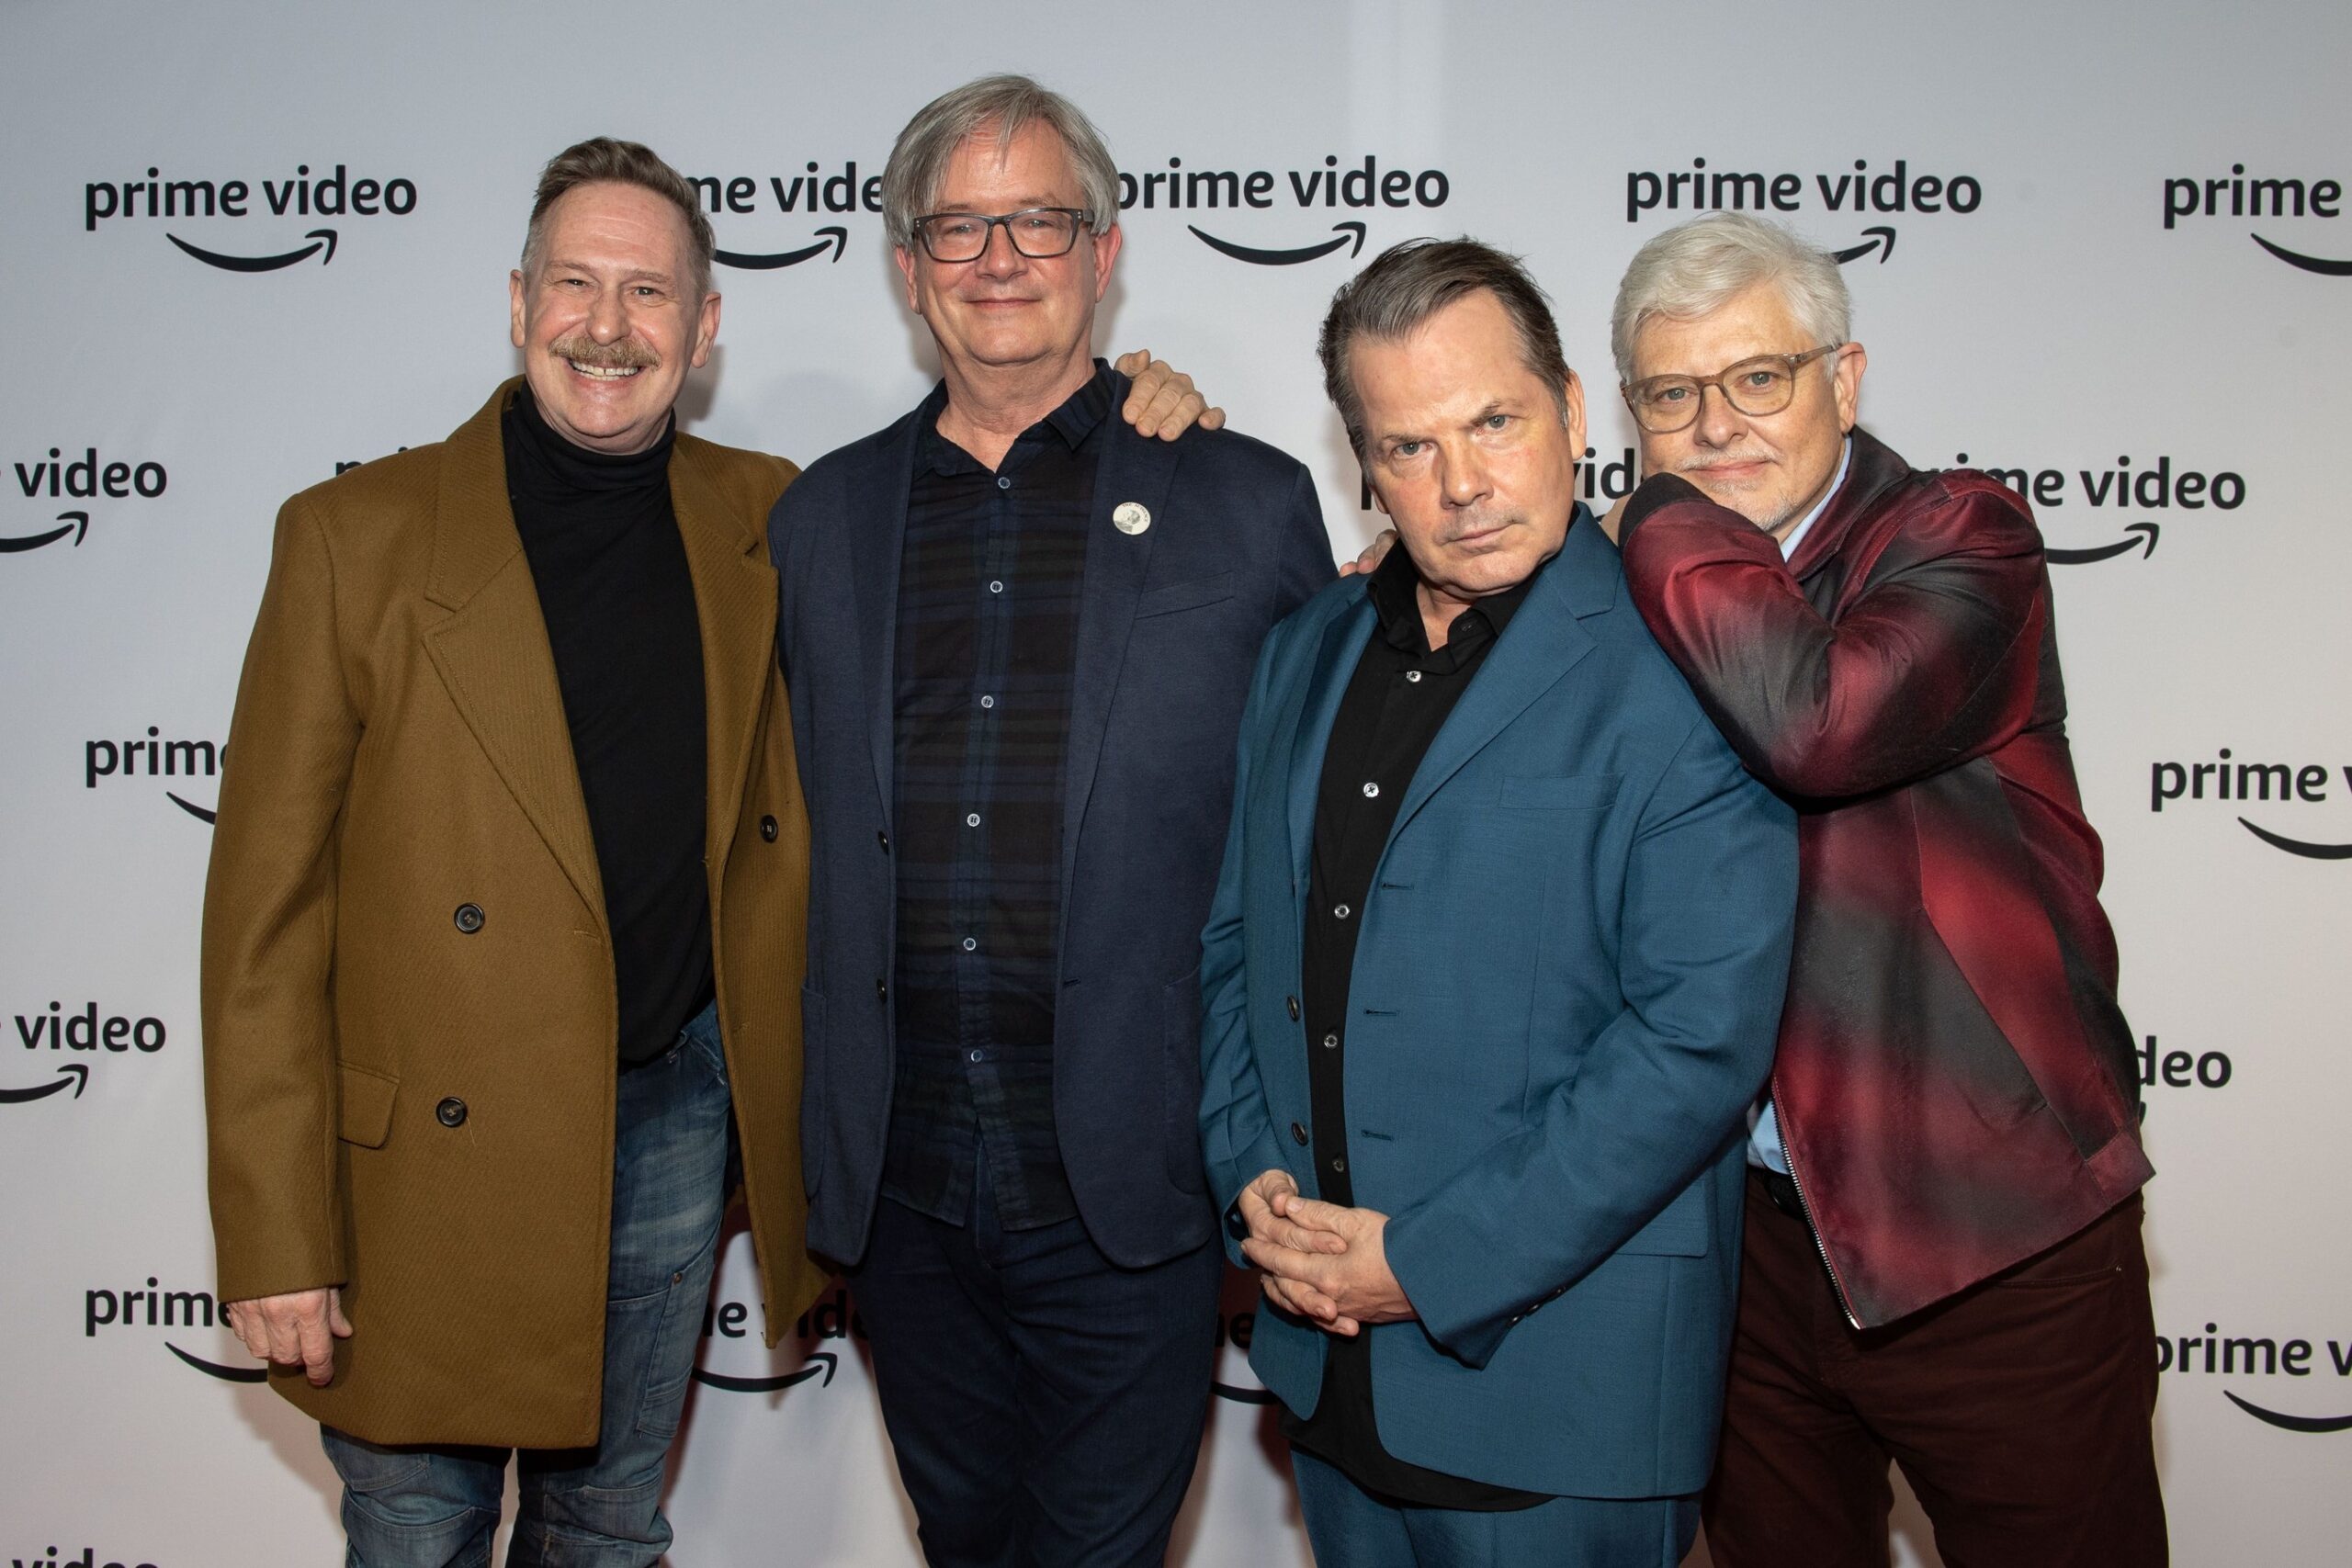 Prime Video-The Kids are Back- Prime Video Hosted a Star-Studded